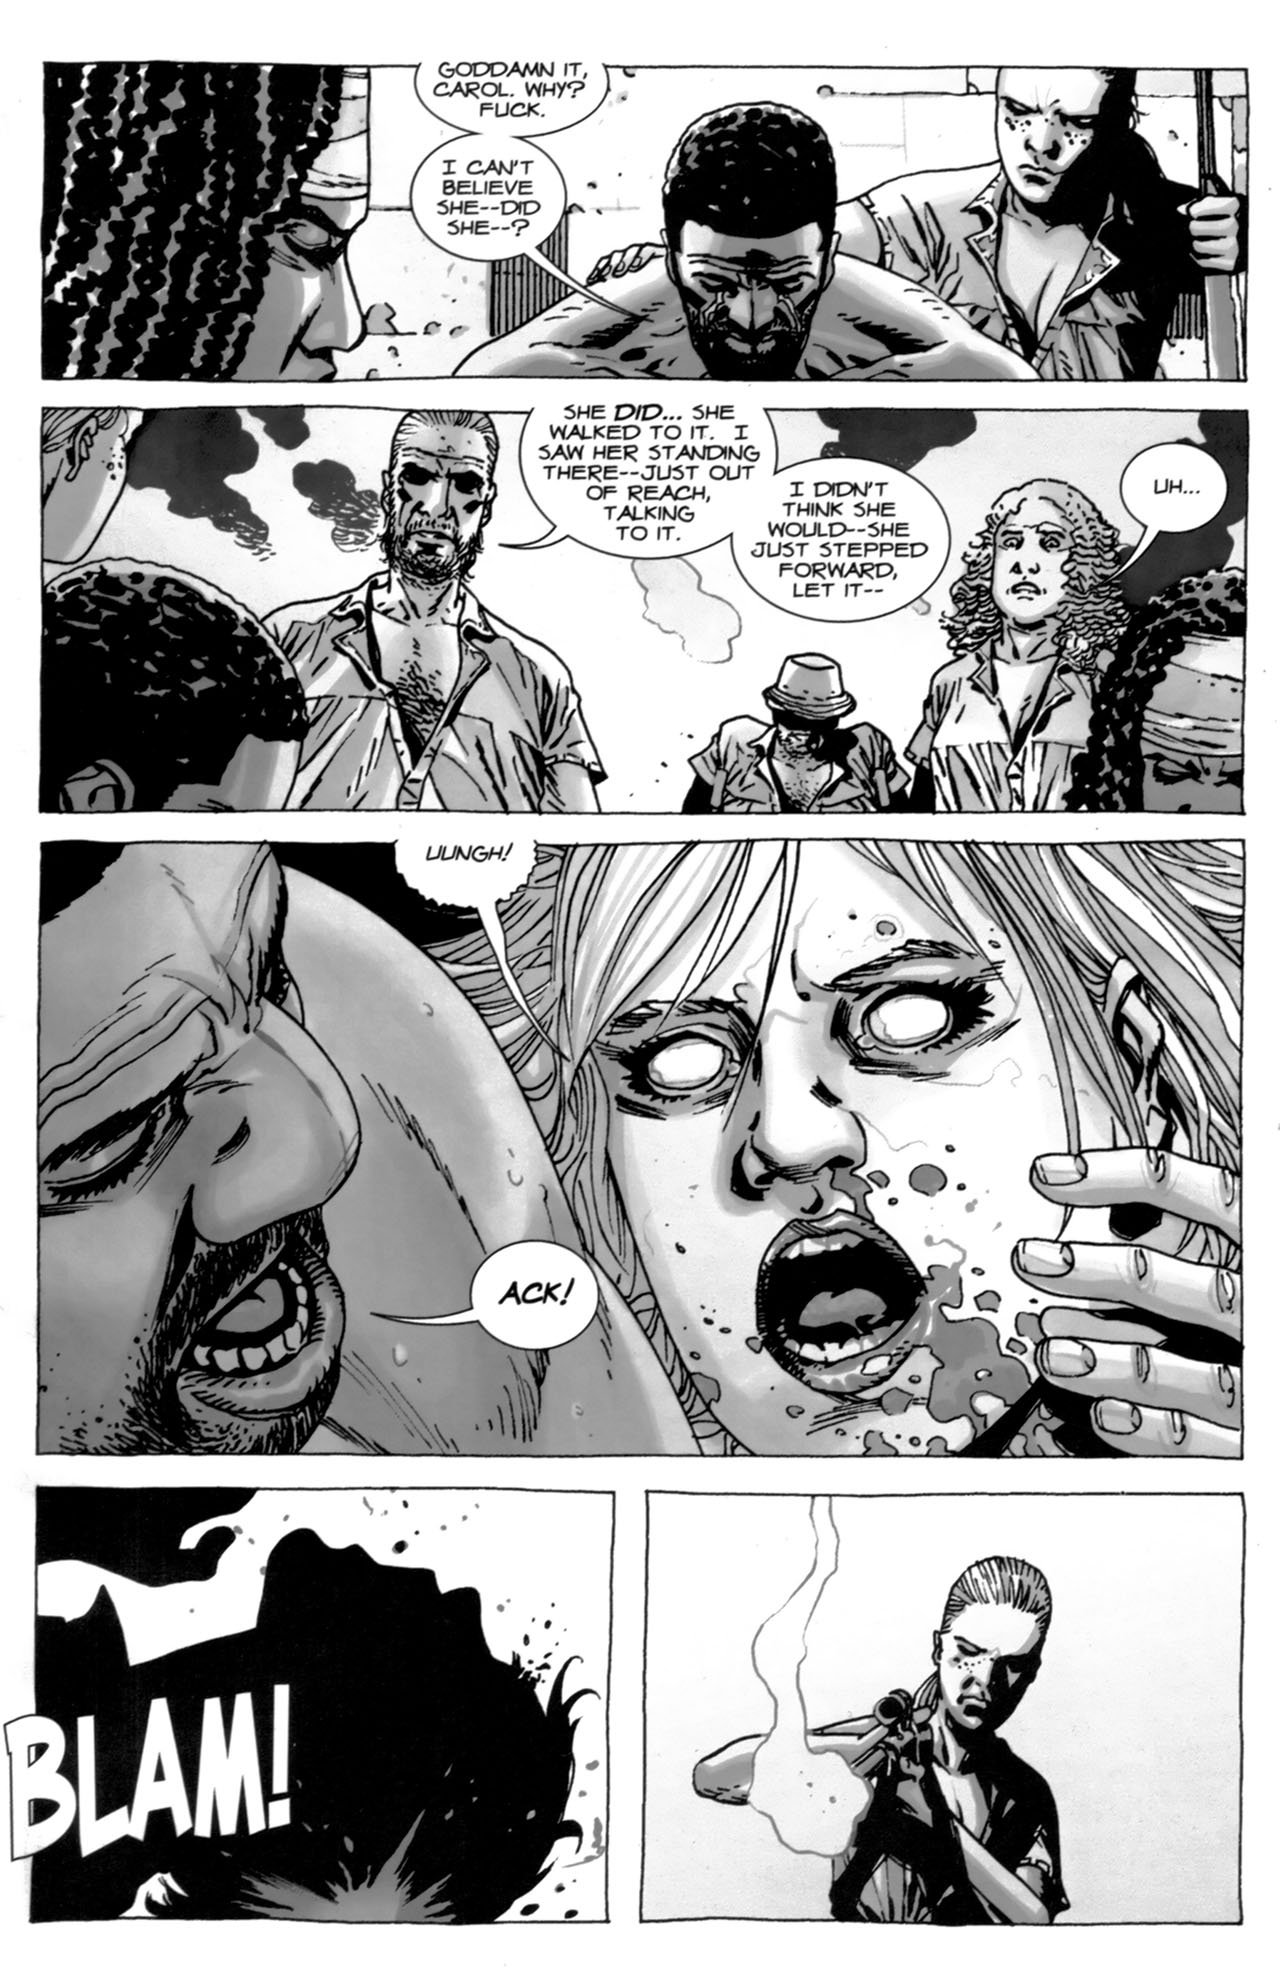 walking dead comic español - Goddamn It, Carol. Why? Fuck. I Can'T Believe SheDid She? She Did... She Walked To It. I Saw Her Standing ThereJust Out Of Reach, I Didn'T Talking Think She To It. WouldShe Just Stepped Forward Let It Uun Ack! co